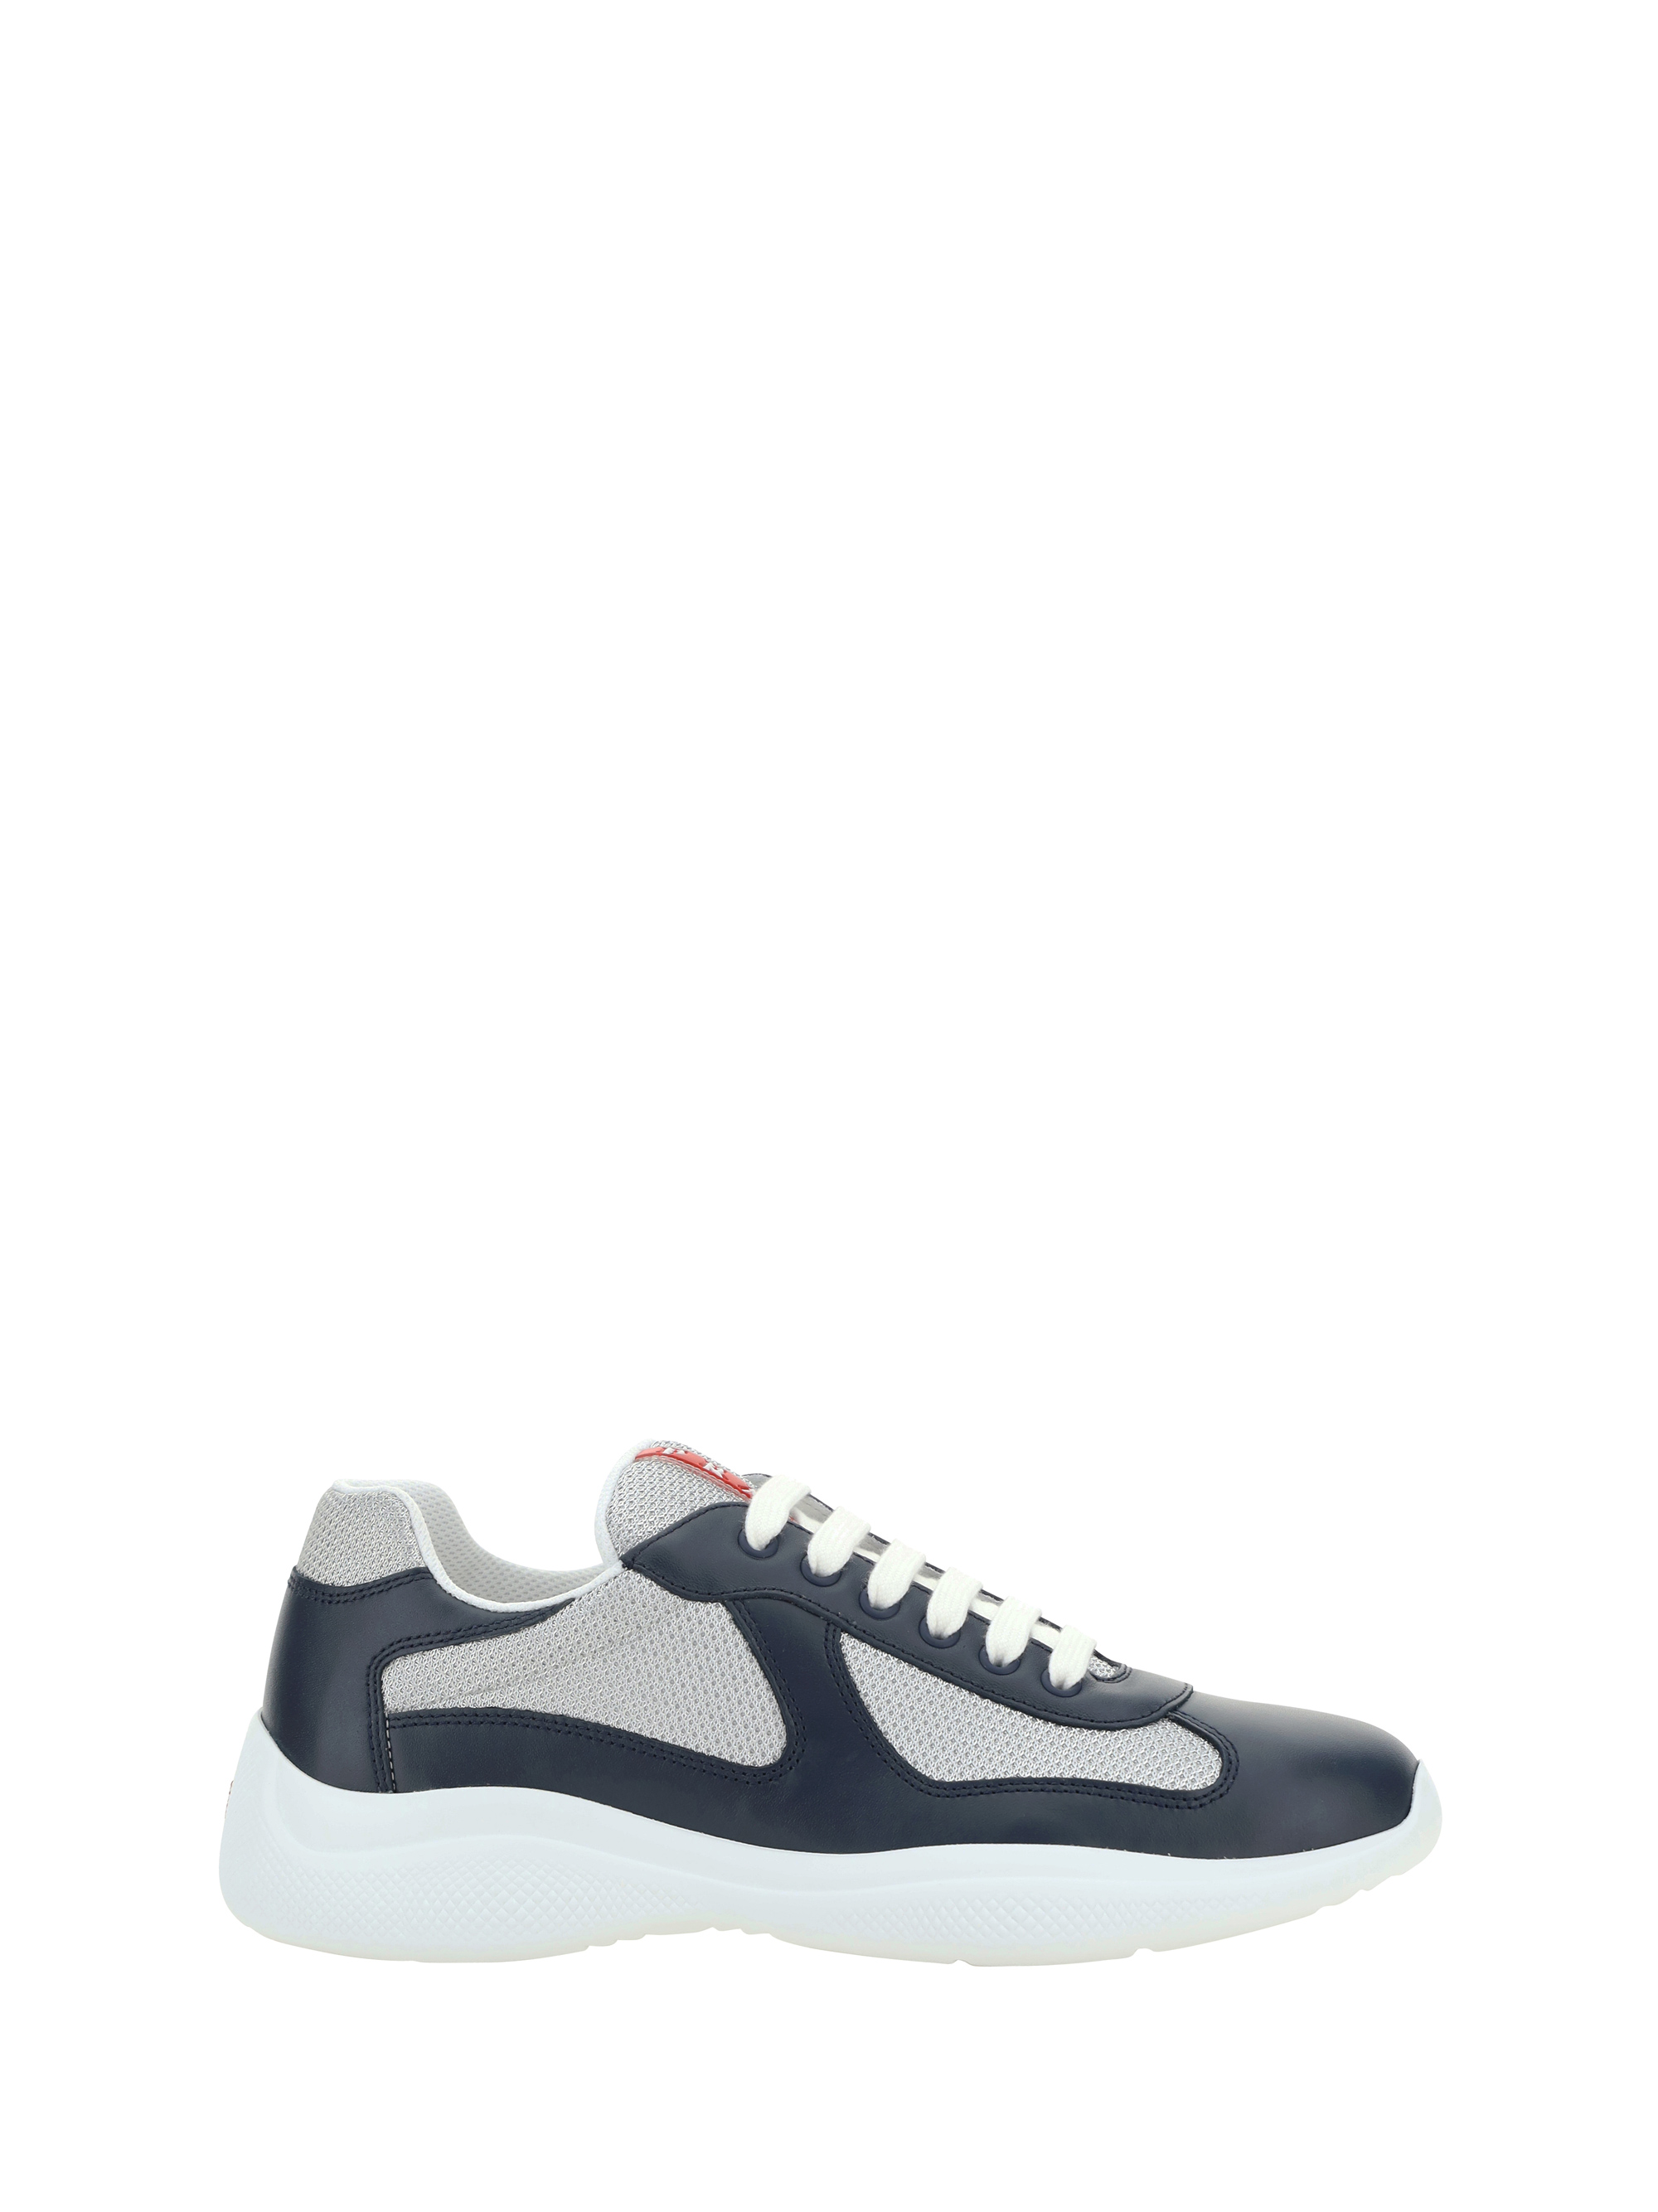 PRADA NEW AMERICAN'S CUP trainers